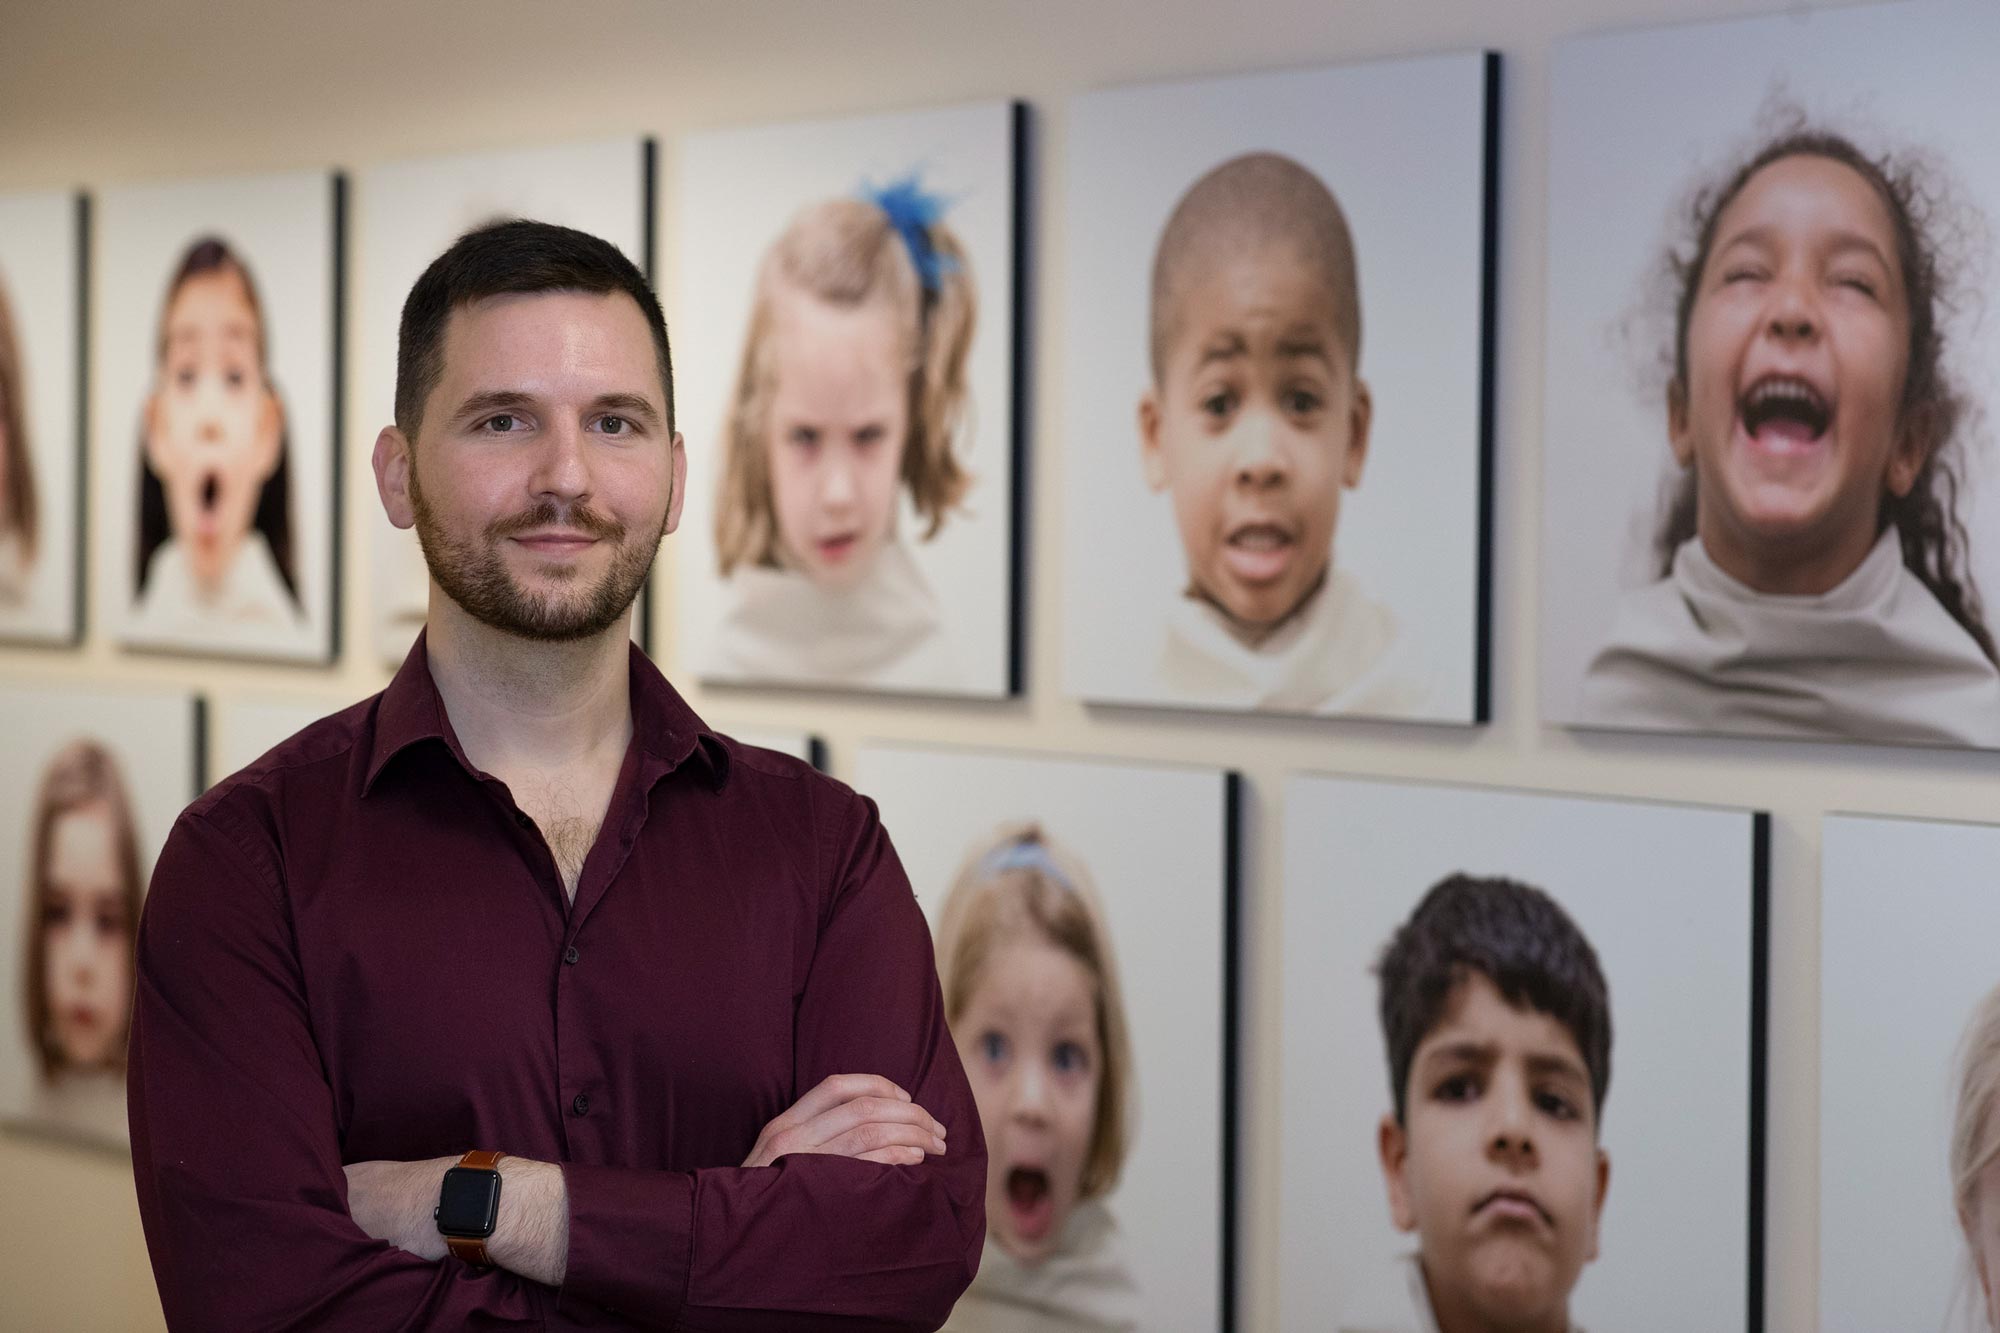 Stefen Beeler-Duden stands in front of portraits of children with his arms crossed looking at the camera